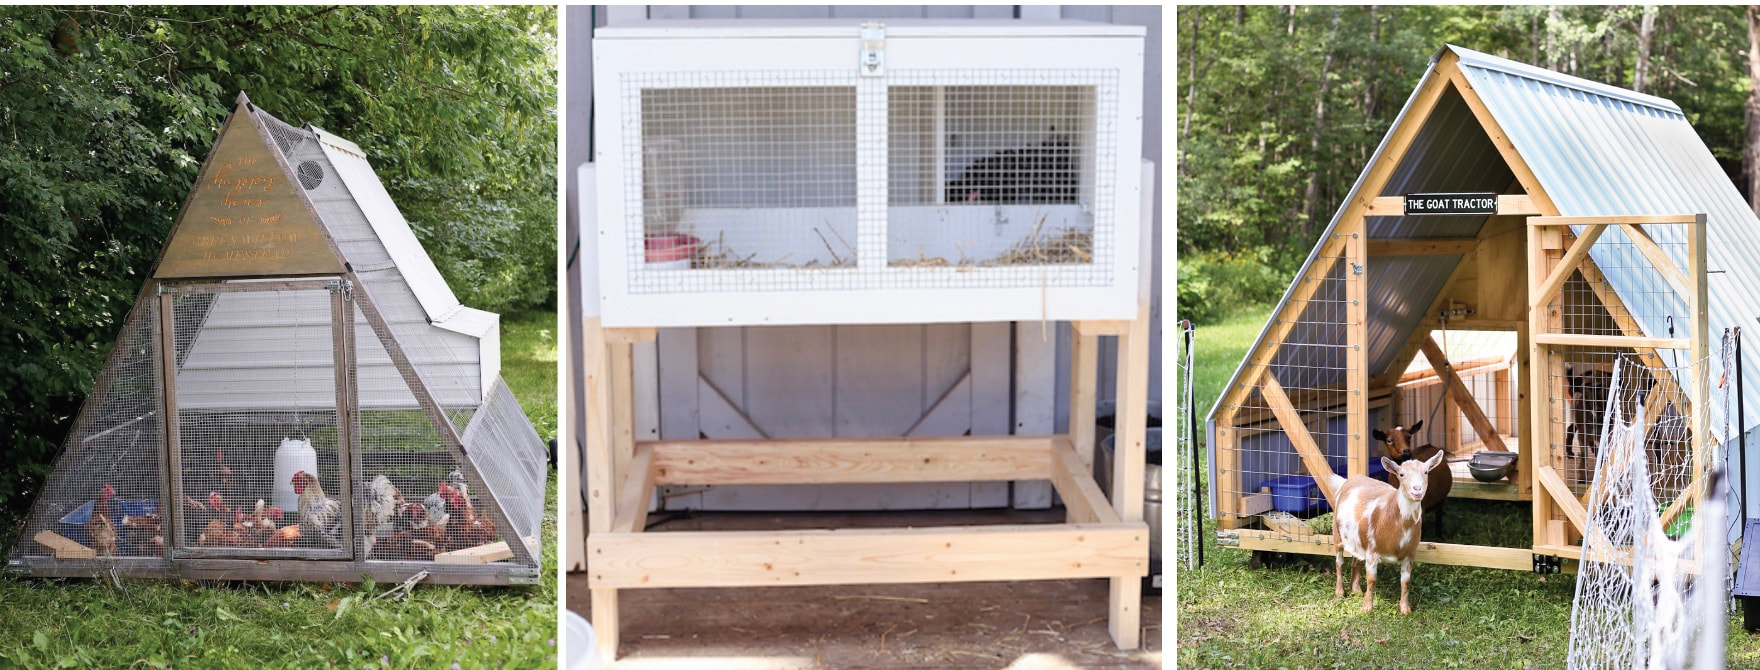 DIY chicken coops and goat barns